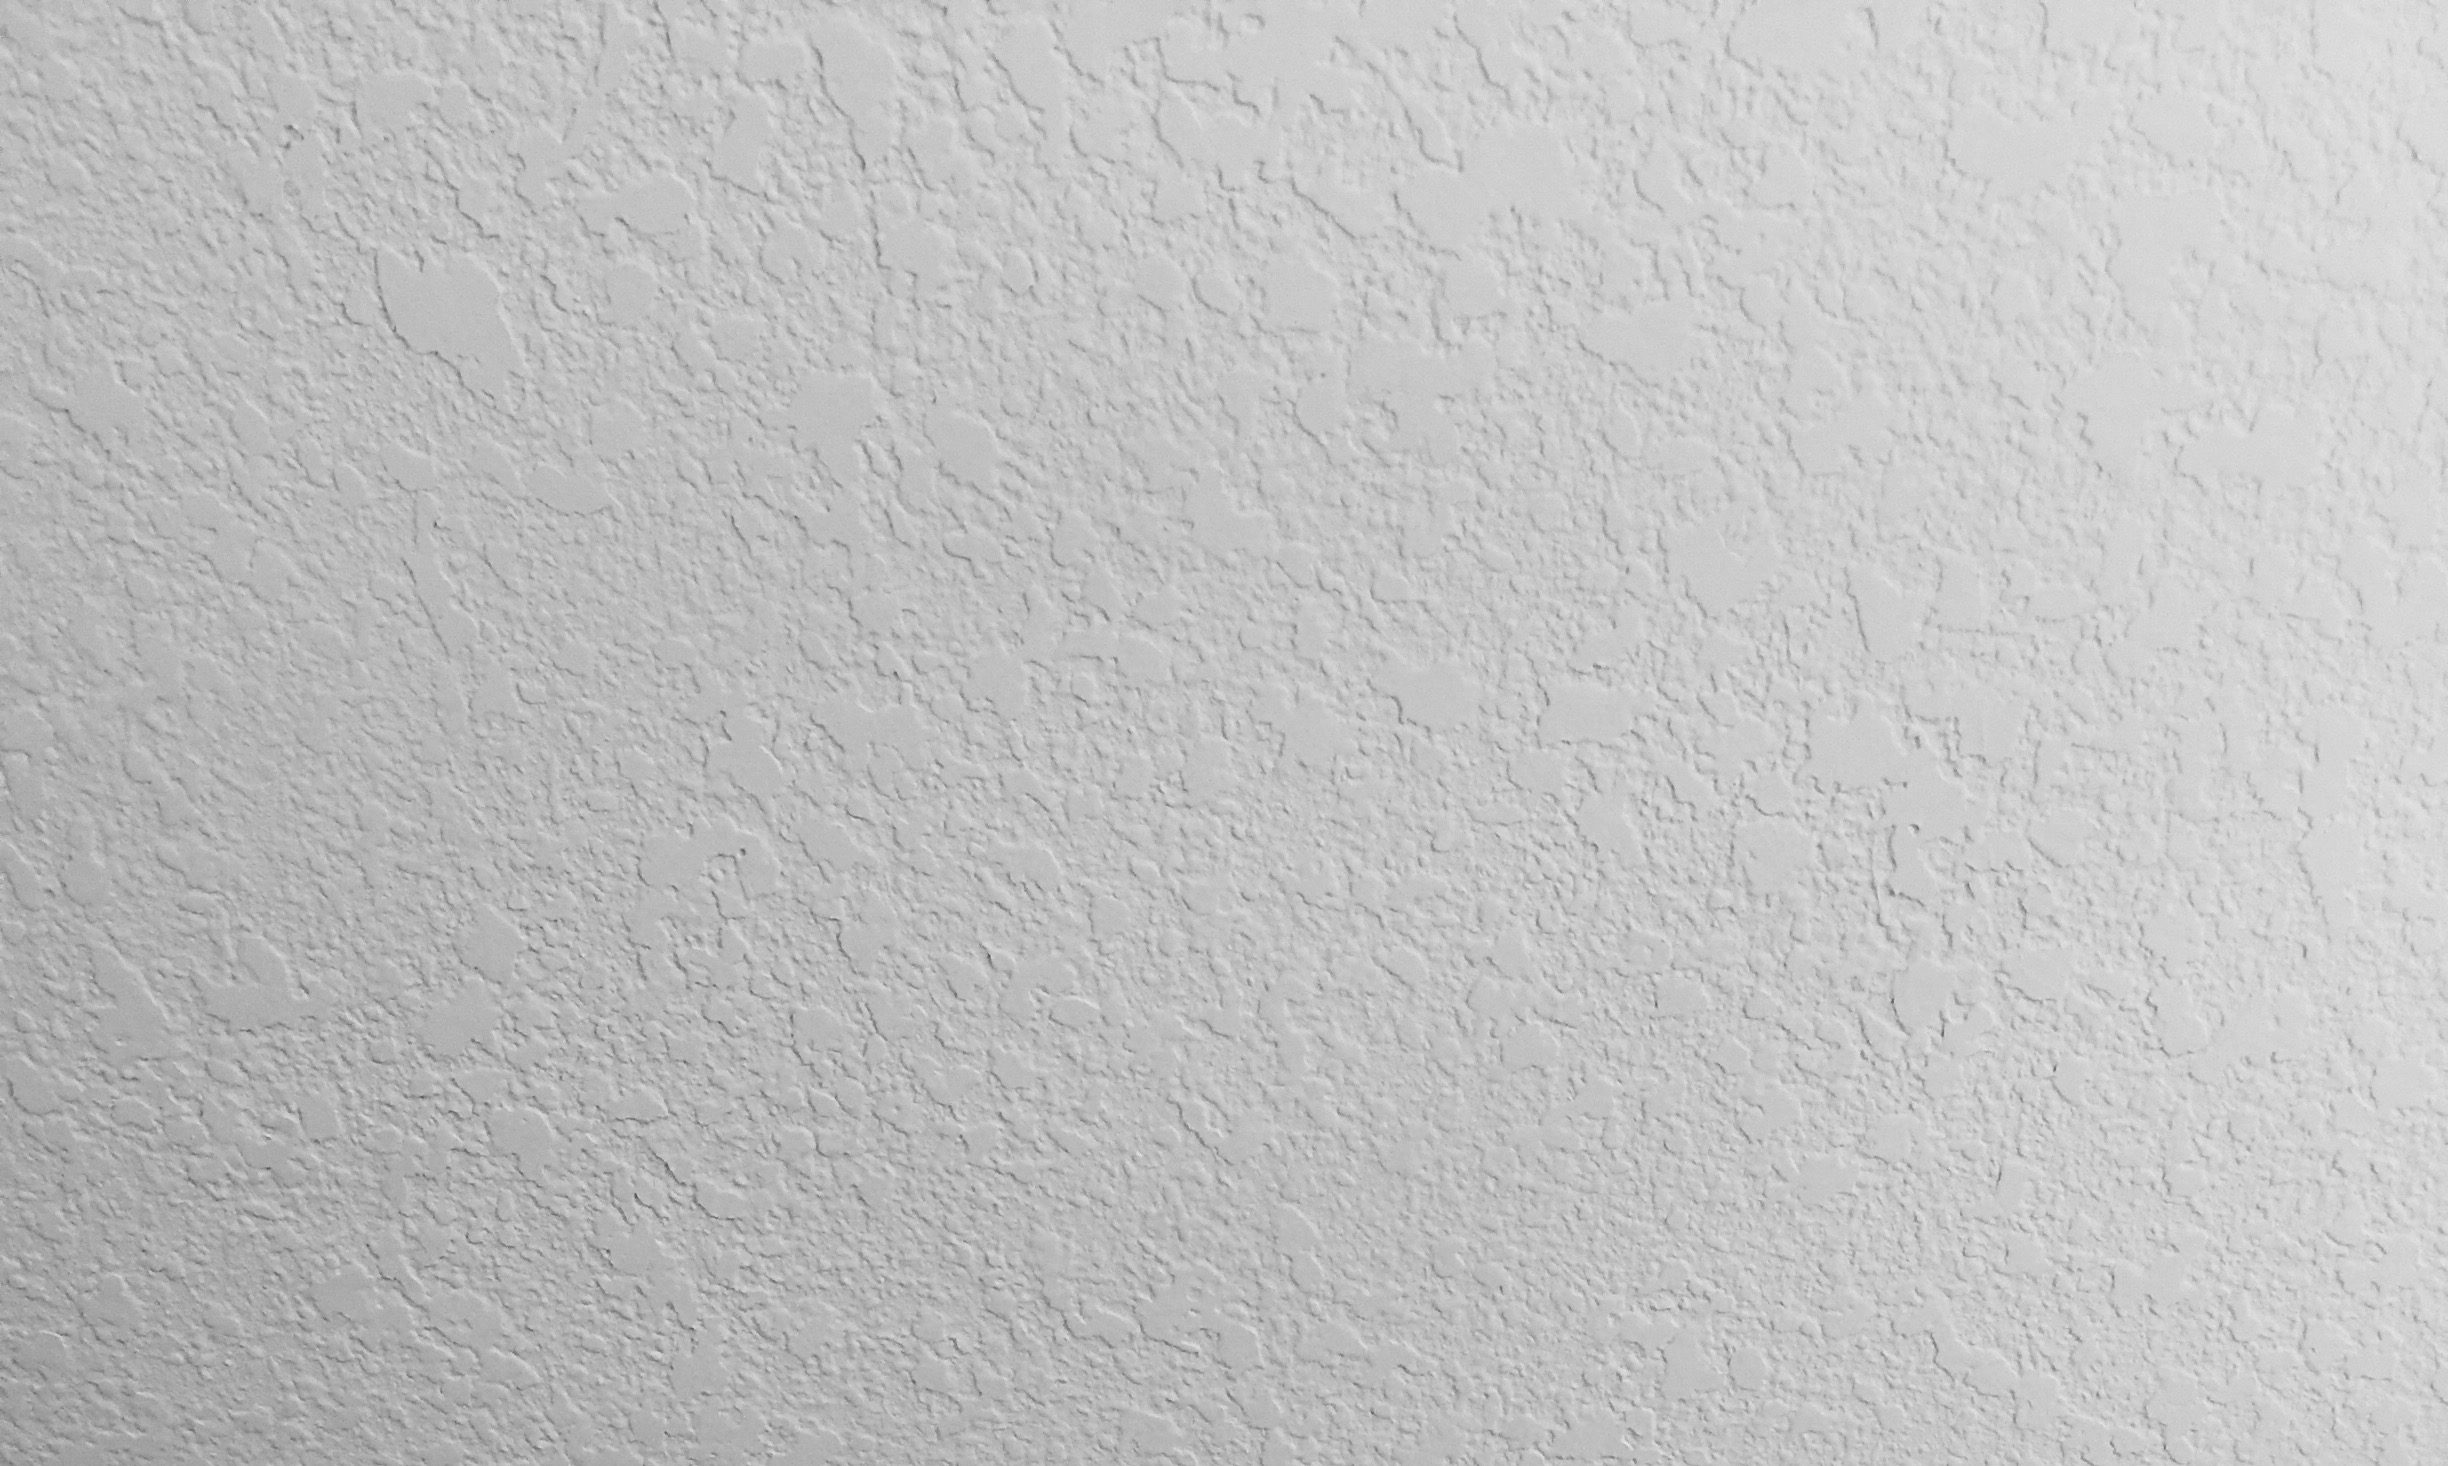 How to texture a ceiling